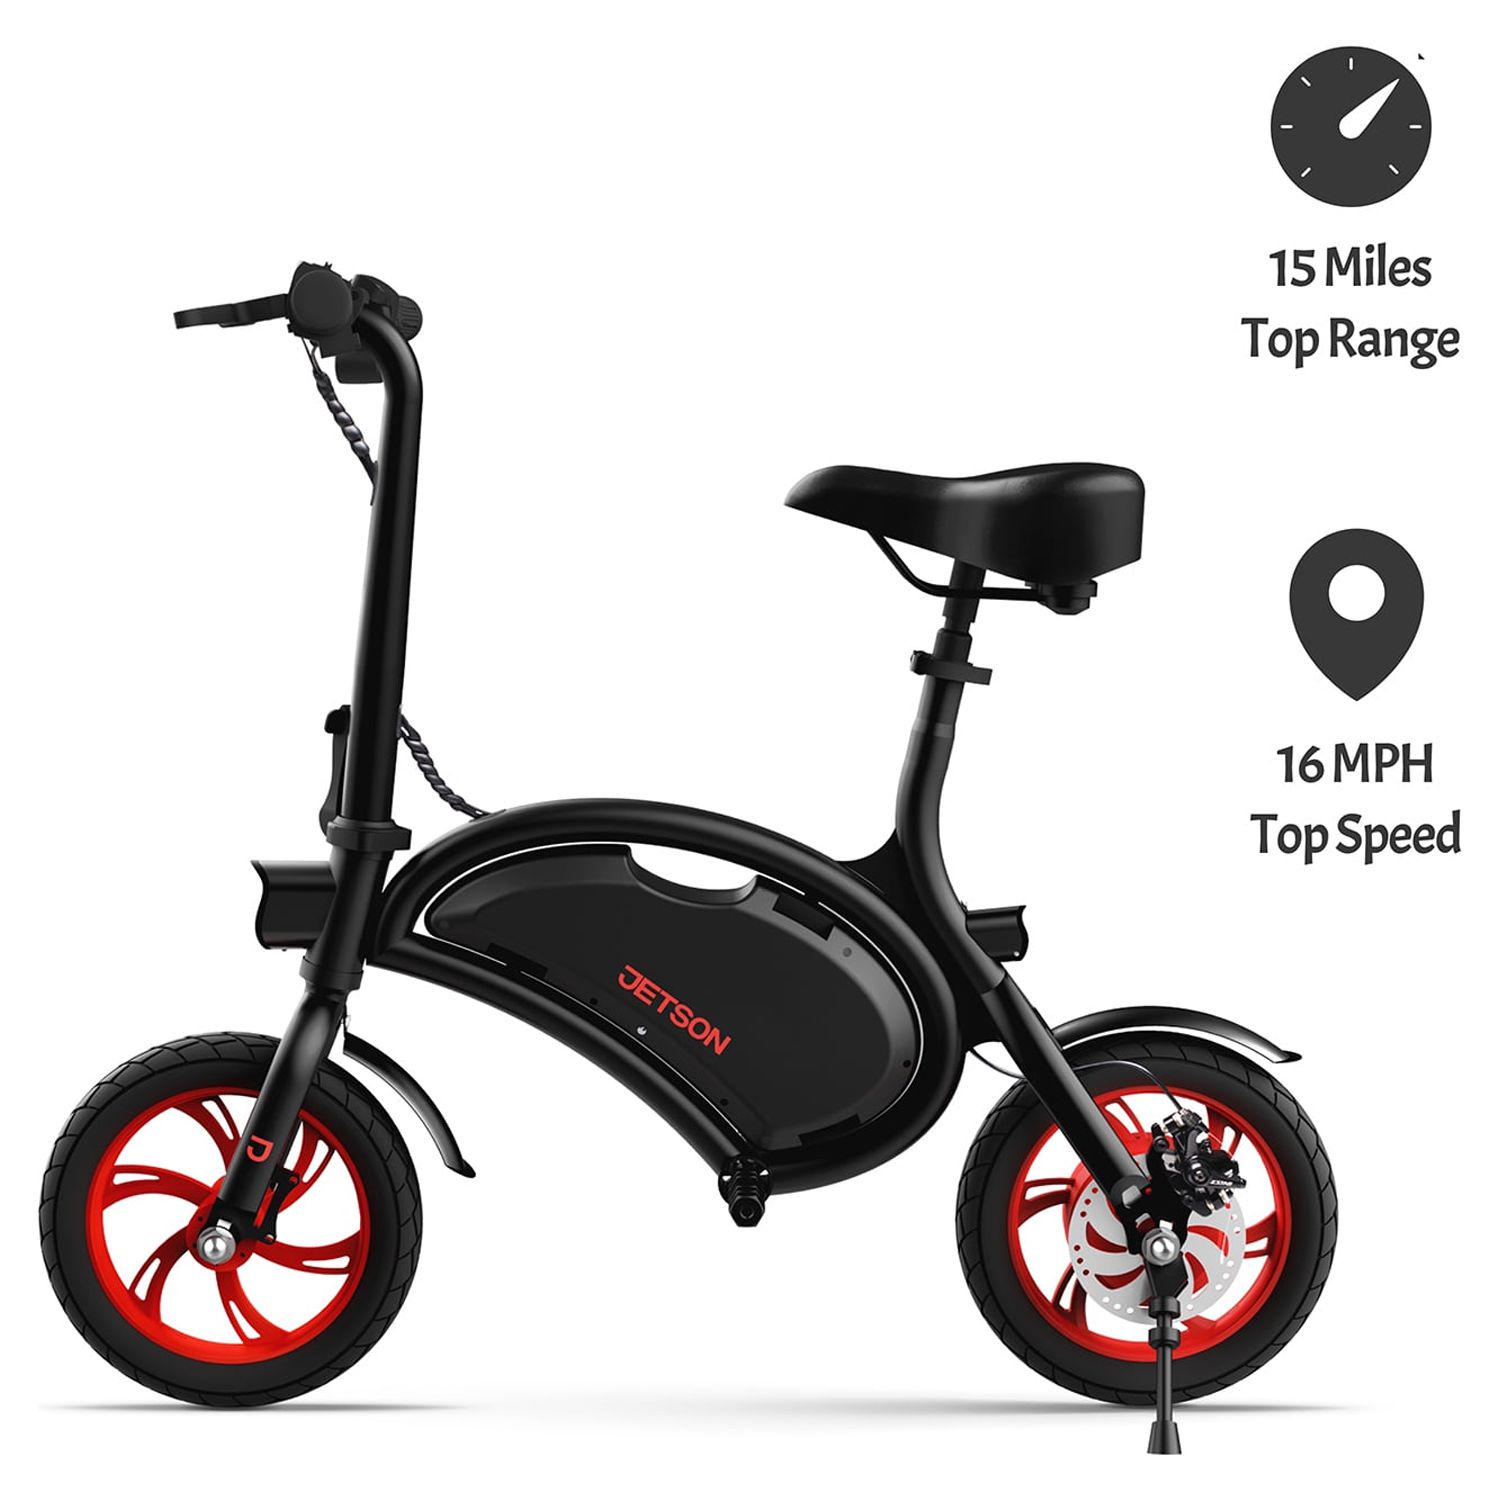 Jetson Bolt Folding Electric Ride-On with Twist Throttle, Cruise Control, Up to 15.5 mph, Black - image 8 of 17